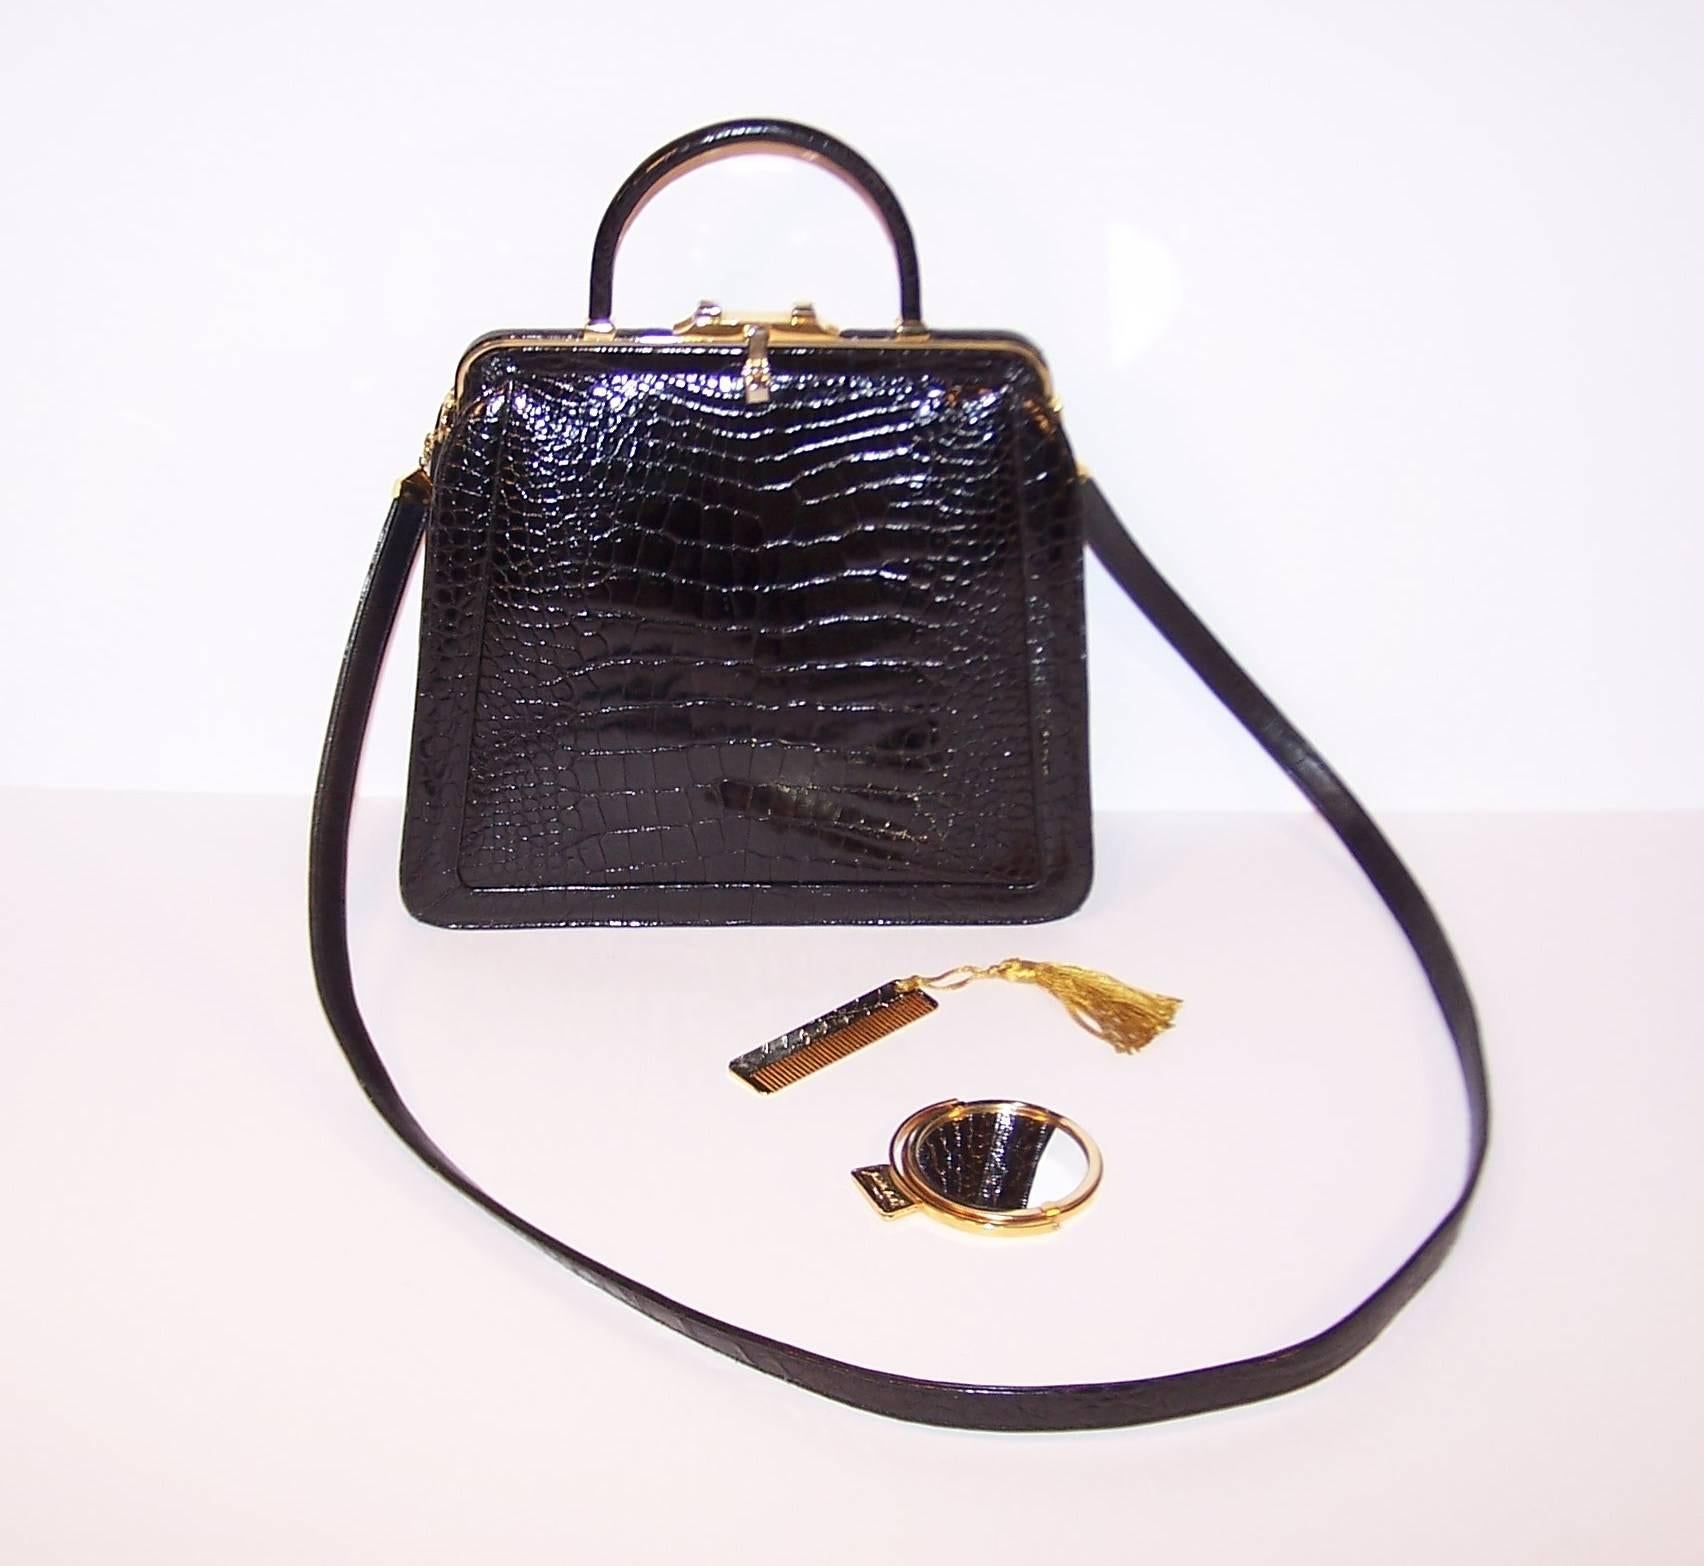 Just like a classic 'little black dress', every wardrobe needs a classic black handbag.  This Judith Leiber black alligator handbag is beautifully designed with the practical option of using the top handle or the detachable shoulder strap.  The gold